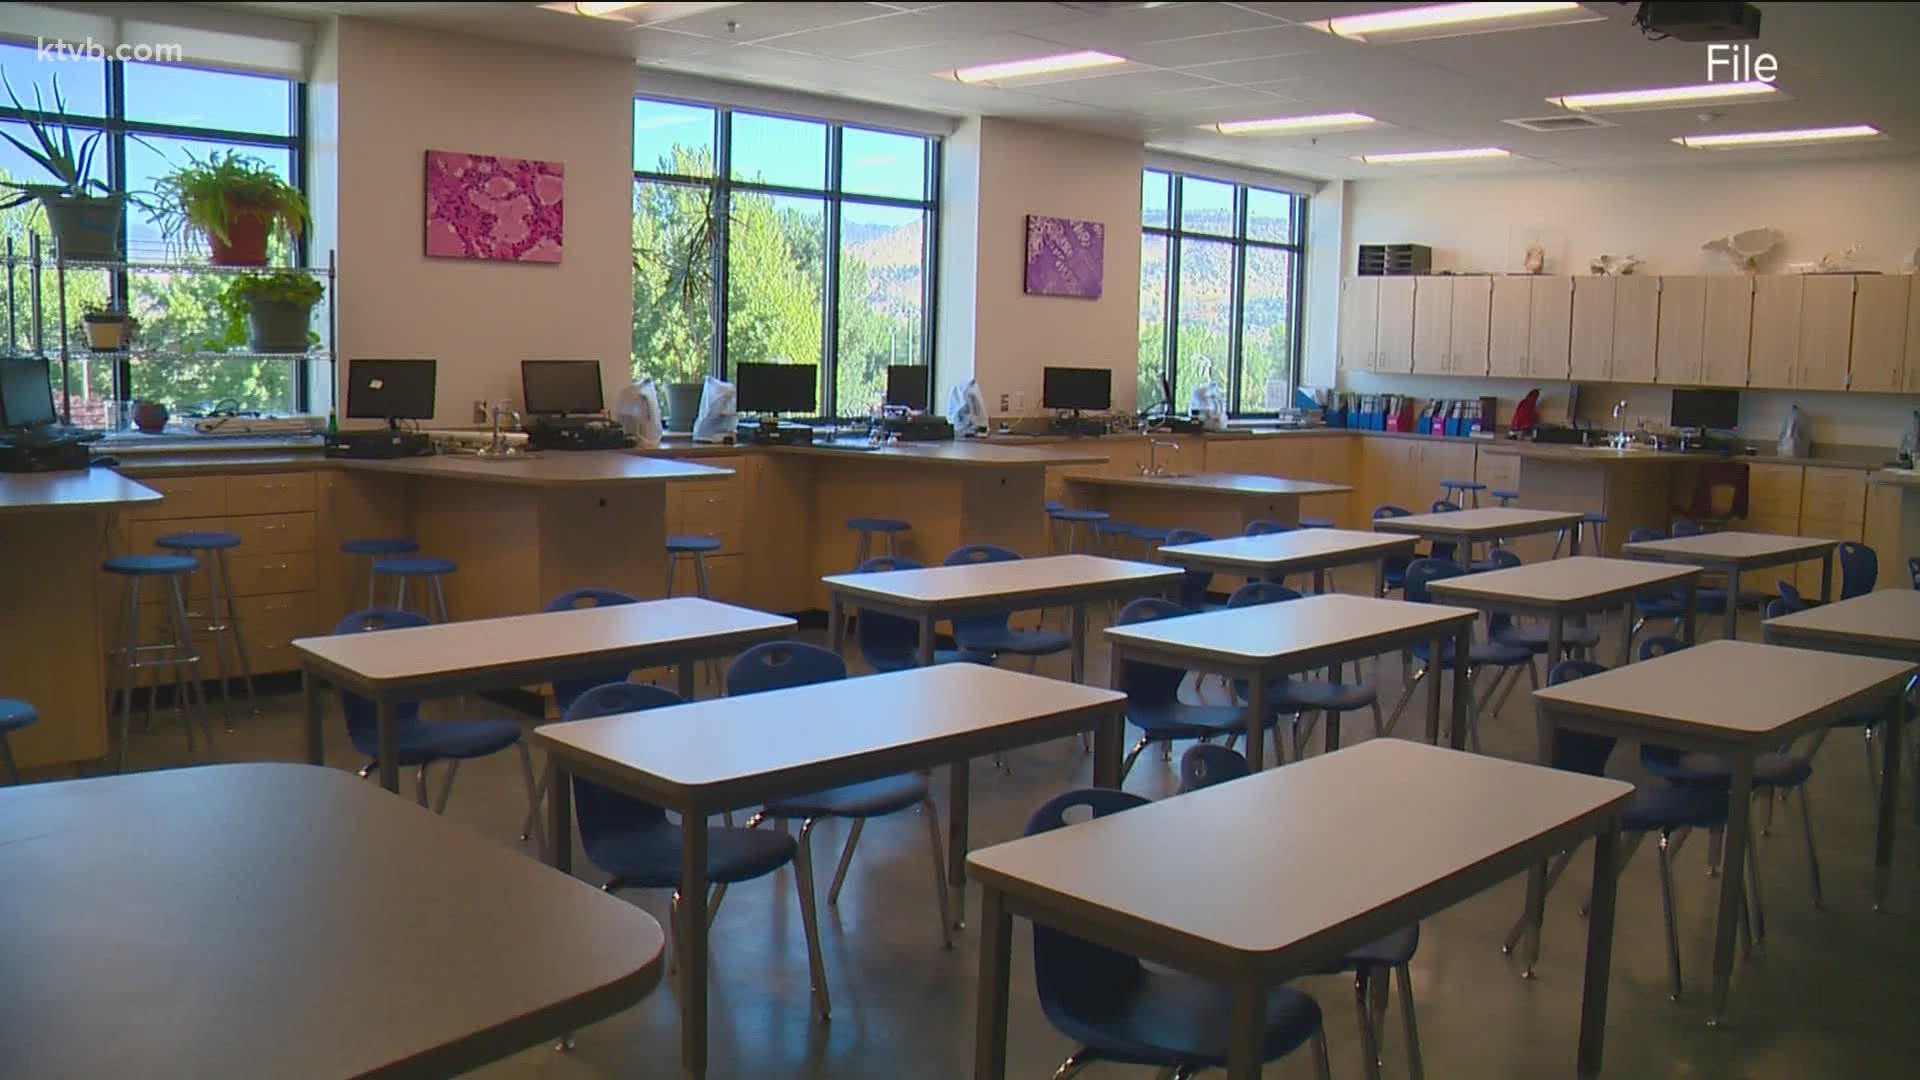 KTVB reached out to several districts in and around the Treasure Valley to find out what plans are in place for the 2020-2021 school year.